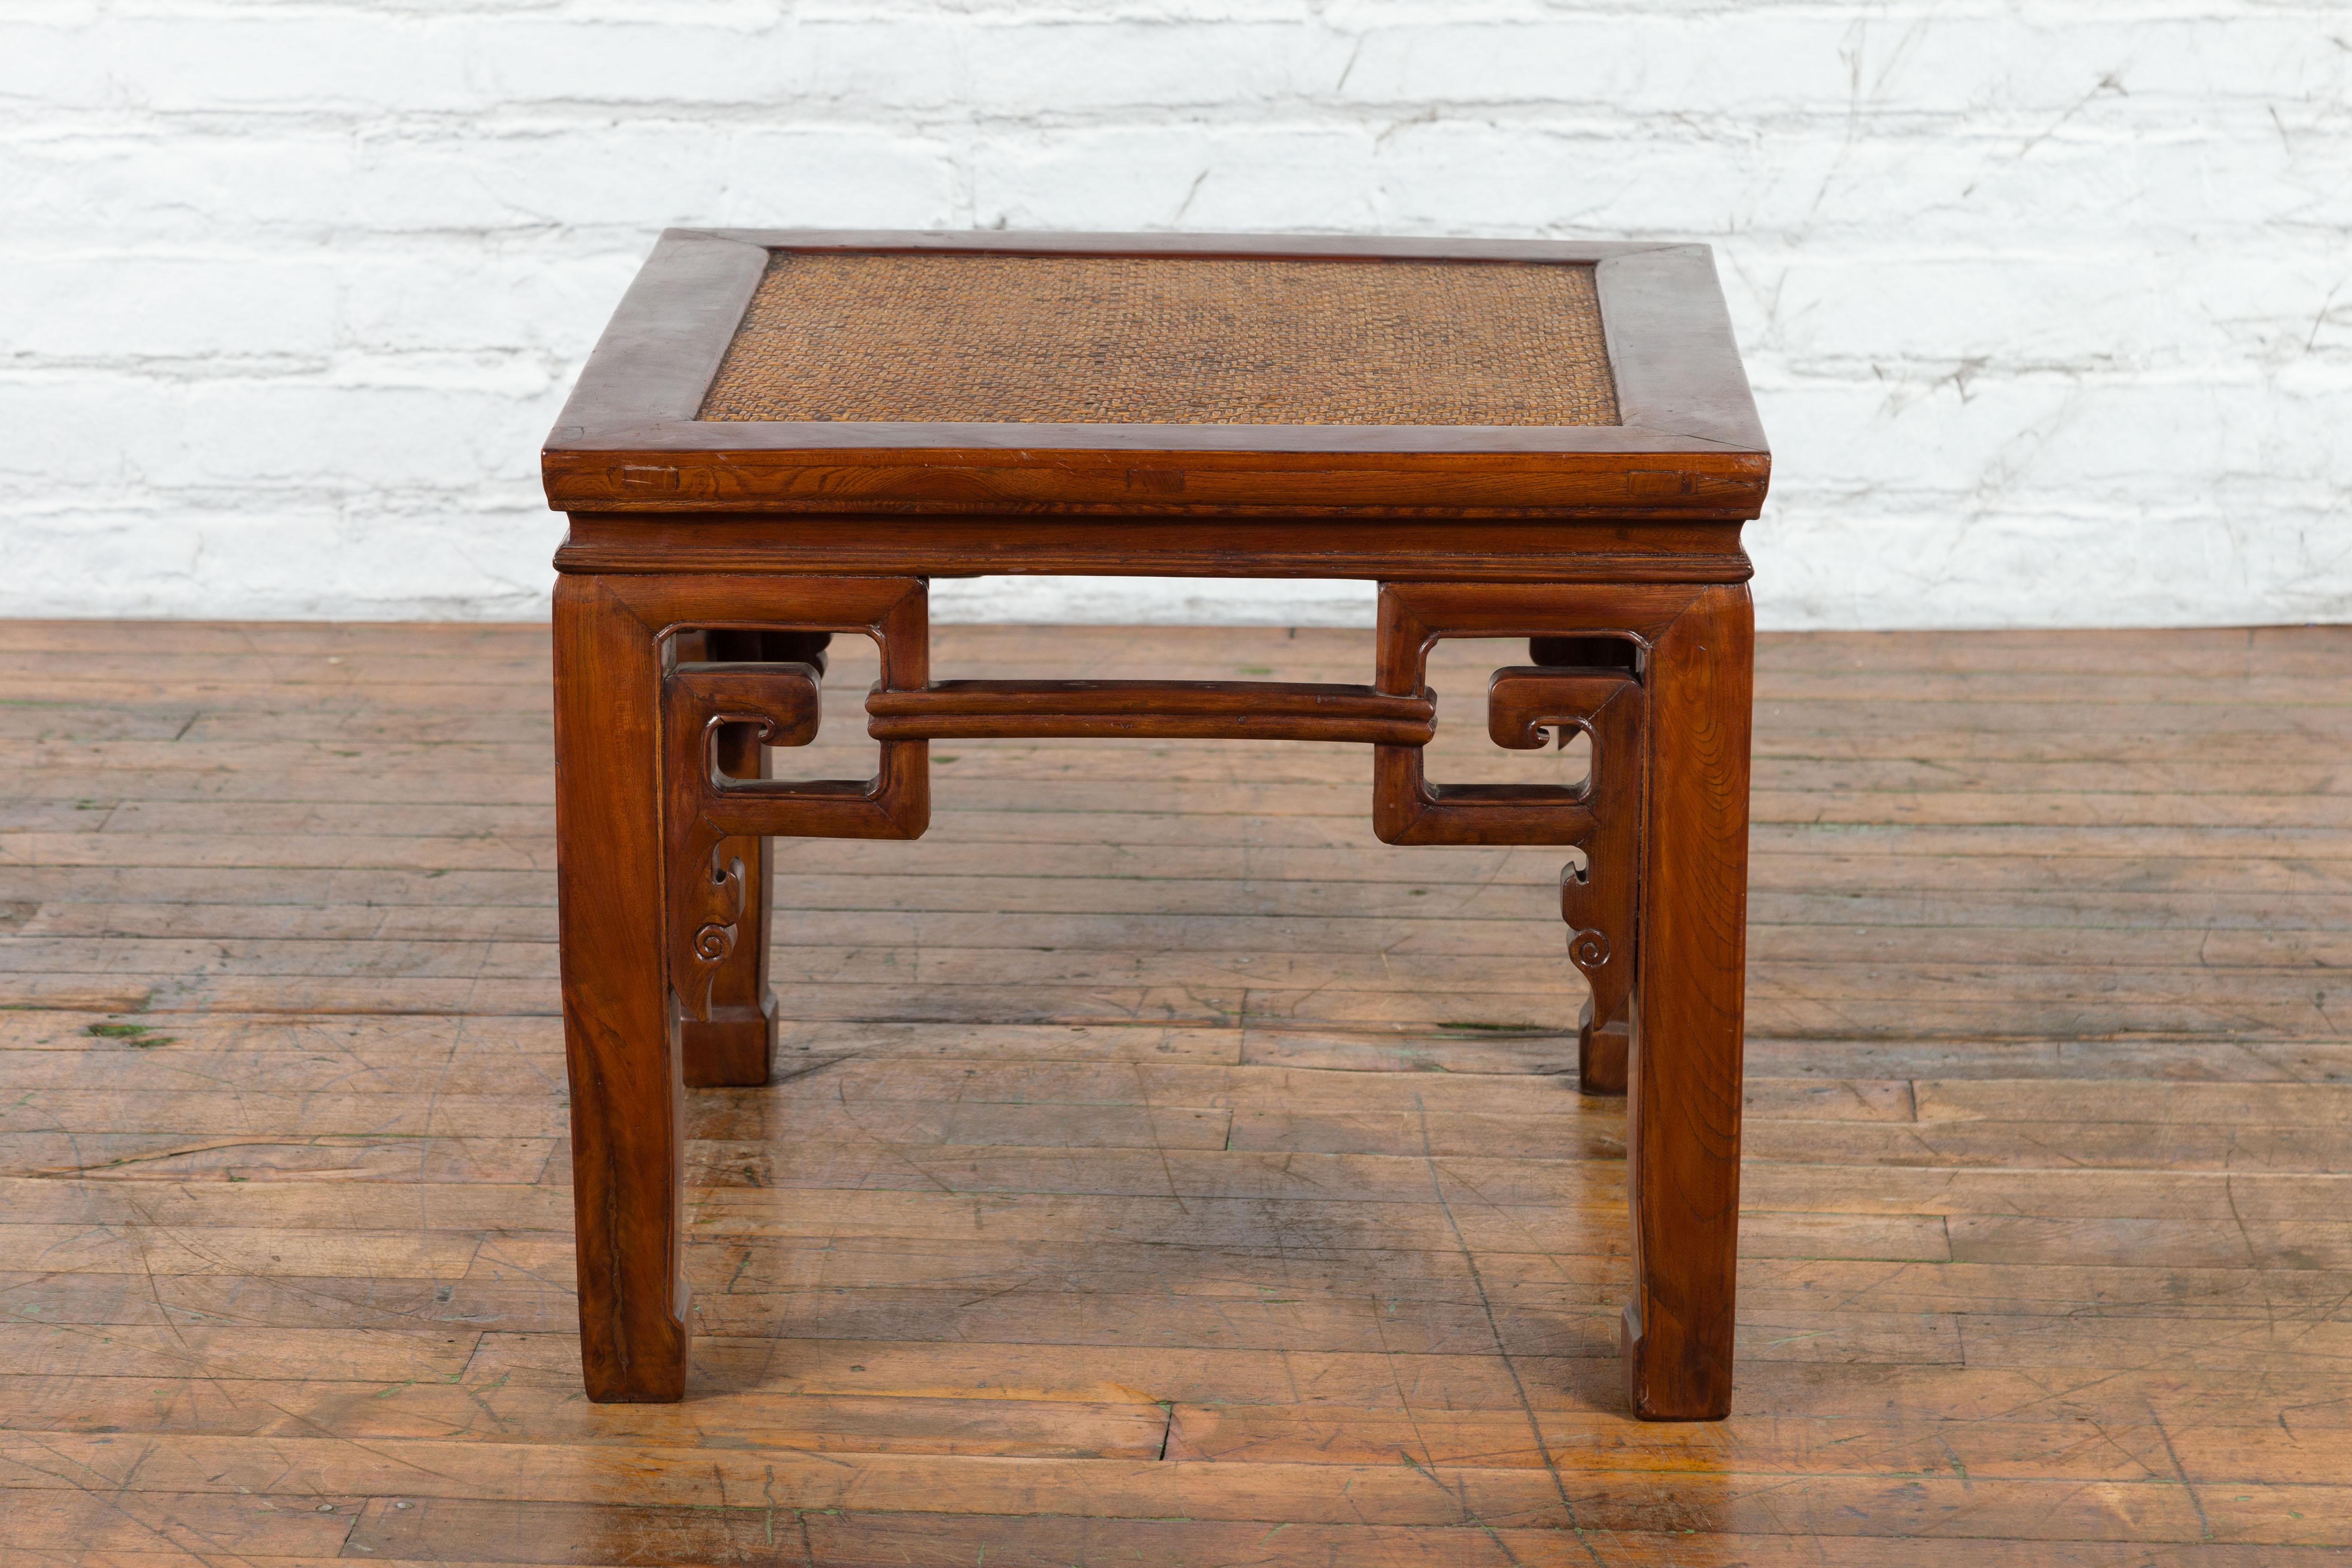 Chinese Qing Dynasty 19th Century Stool or Drinks Table with Woven Rattan Top For Sale 7